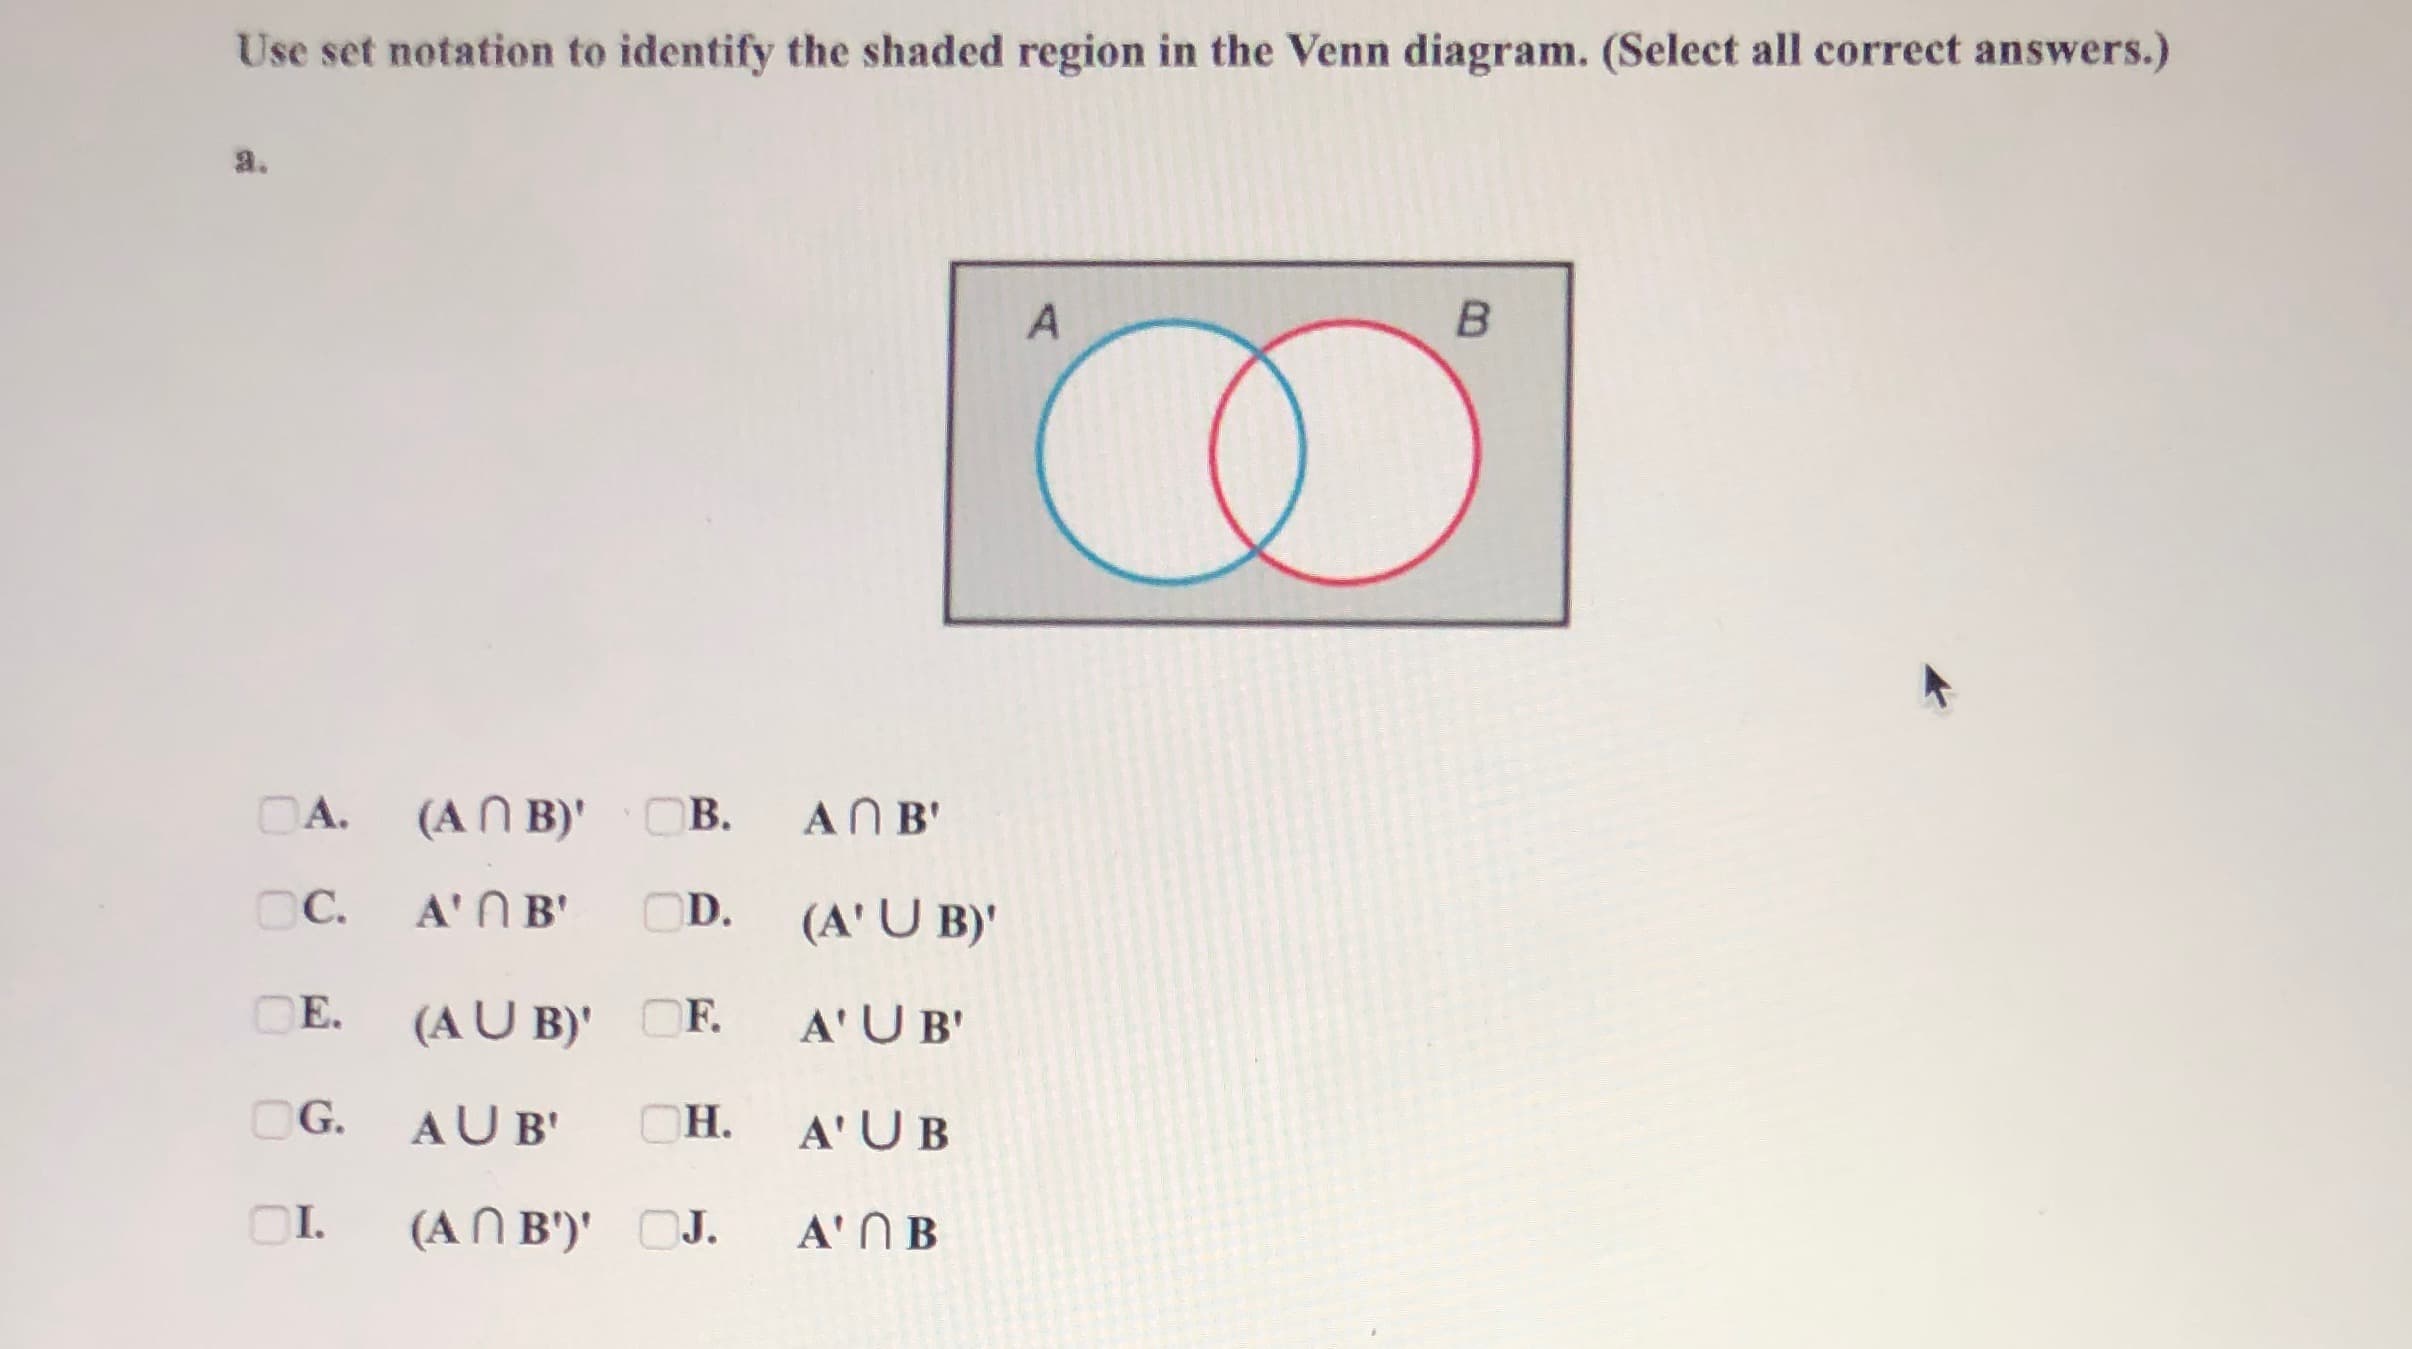 Use set notation to identify the shaded region in the Venn diagram. (Select all correct answers.)
a.
в
DA.
(AN B)' OB.
AN B'
C.
A'N B'
OD.
(A' U B)'
OE.
(AU B)' OF.
A'UB'
OG.
AUB'
Он.
A' UB
OI.
(AN B')' OJ.
A' N B
